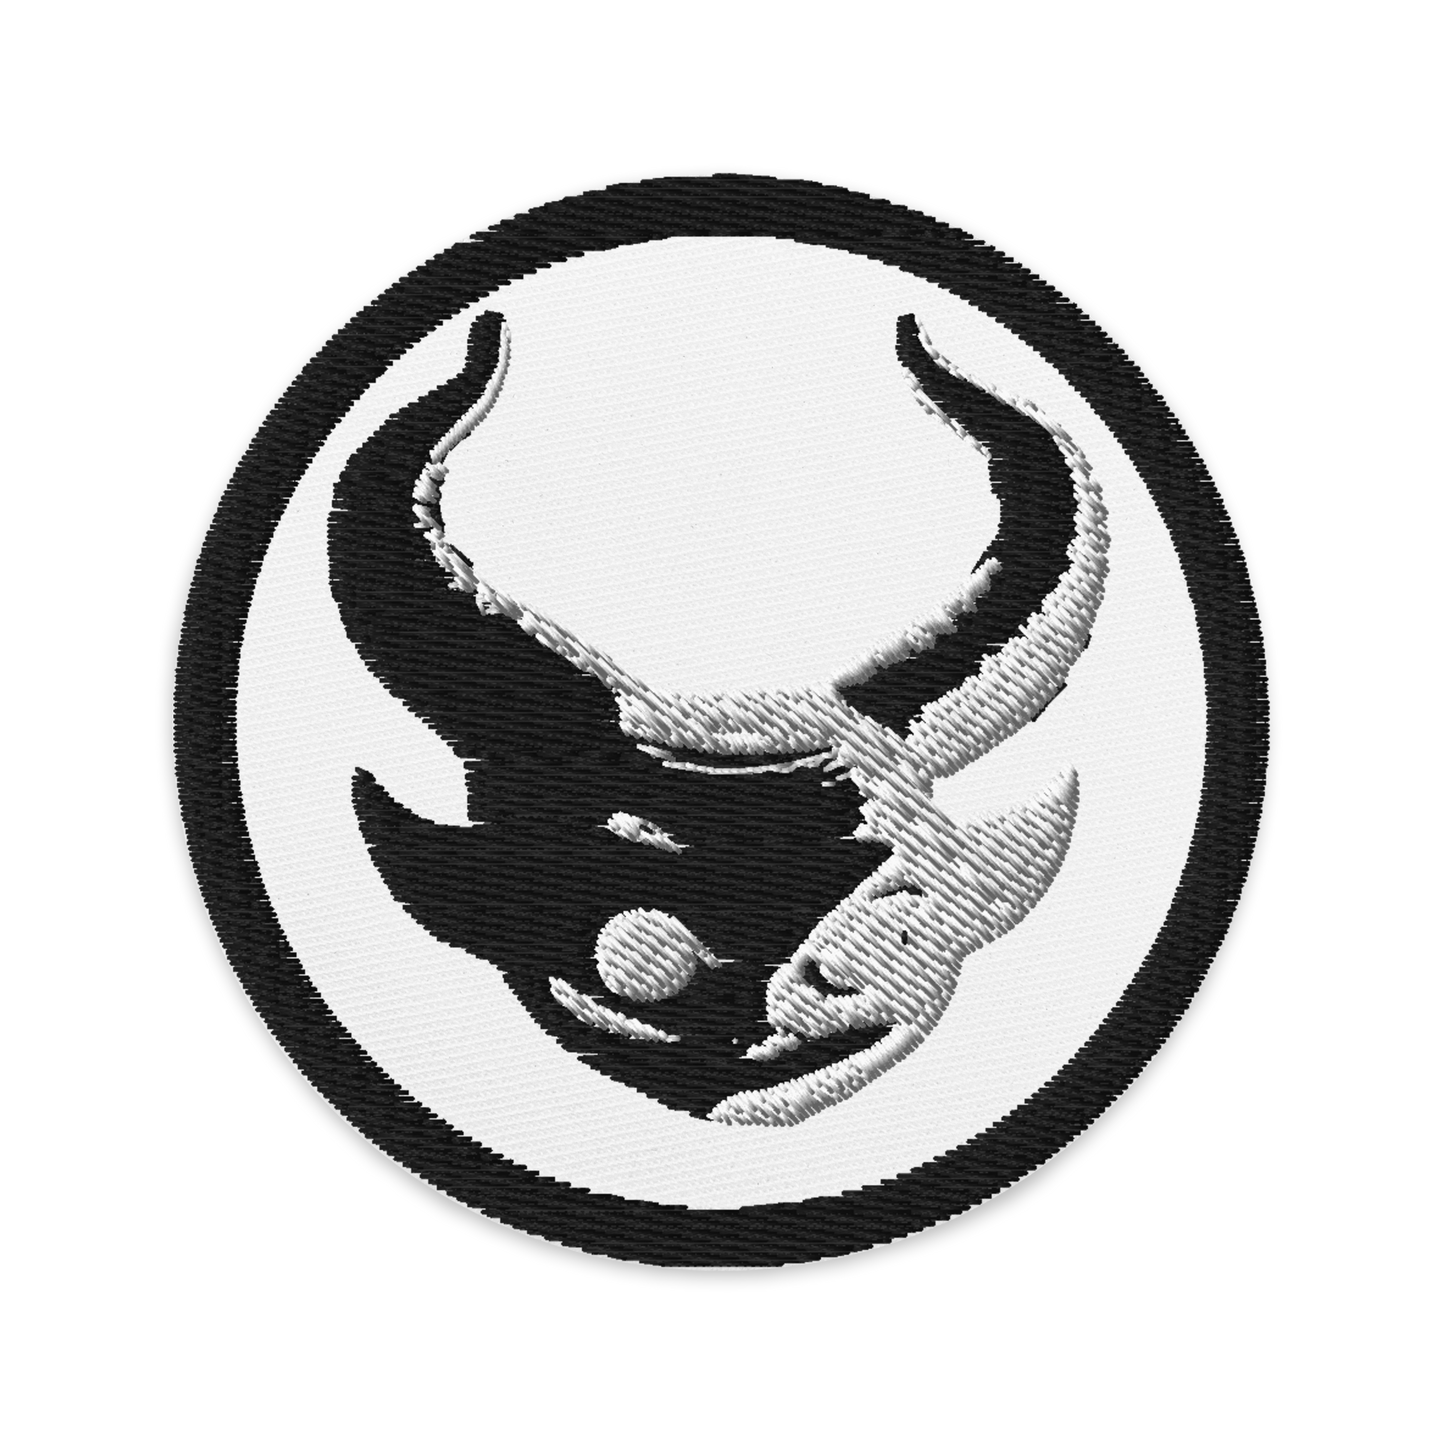 WEARDOZ "Horns" Embroidered patch